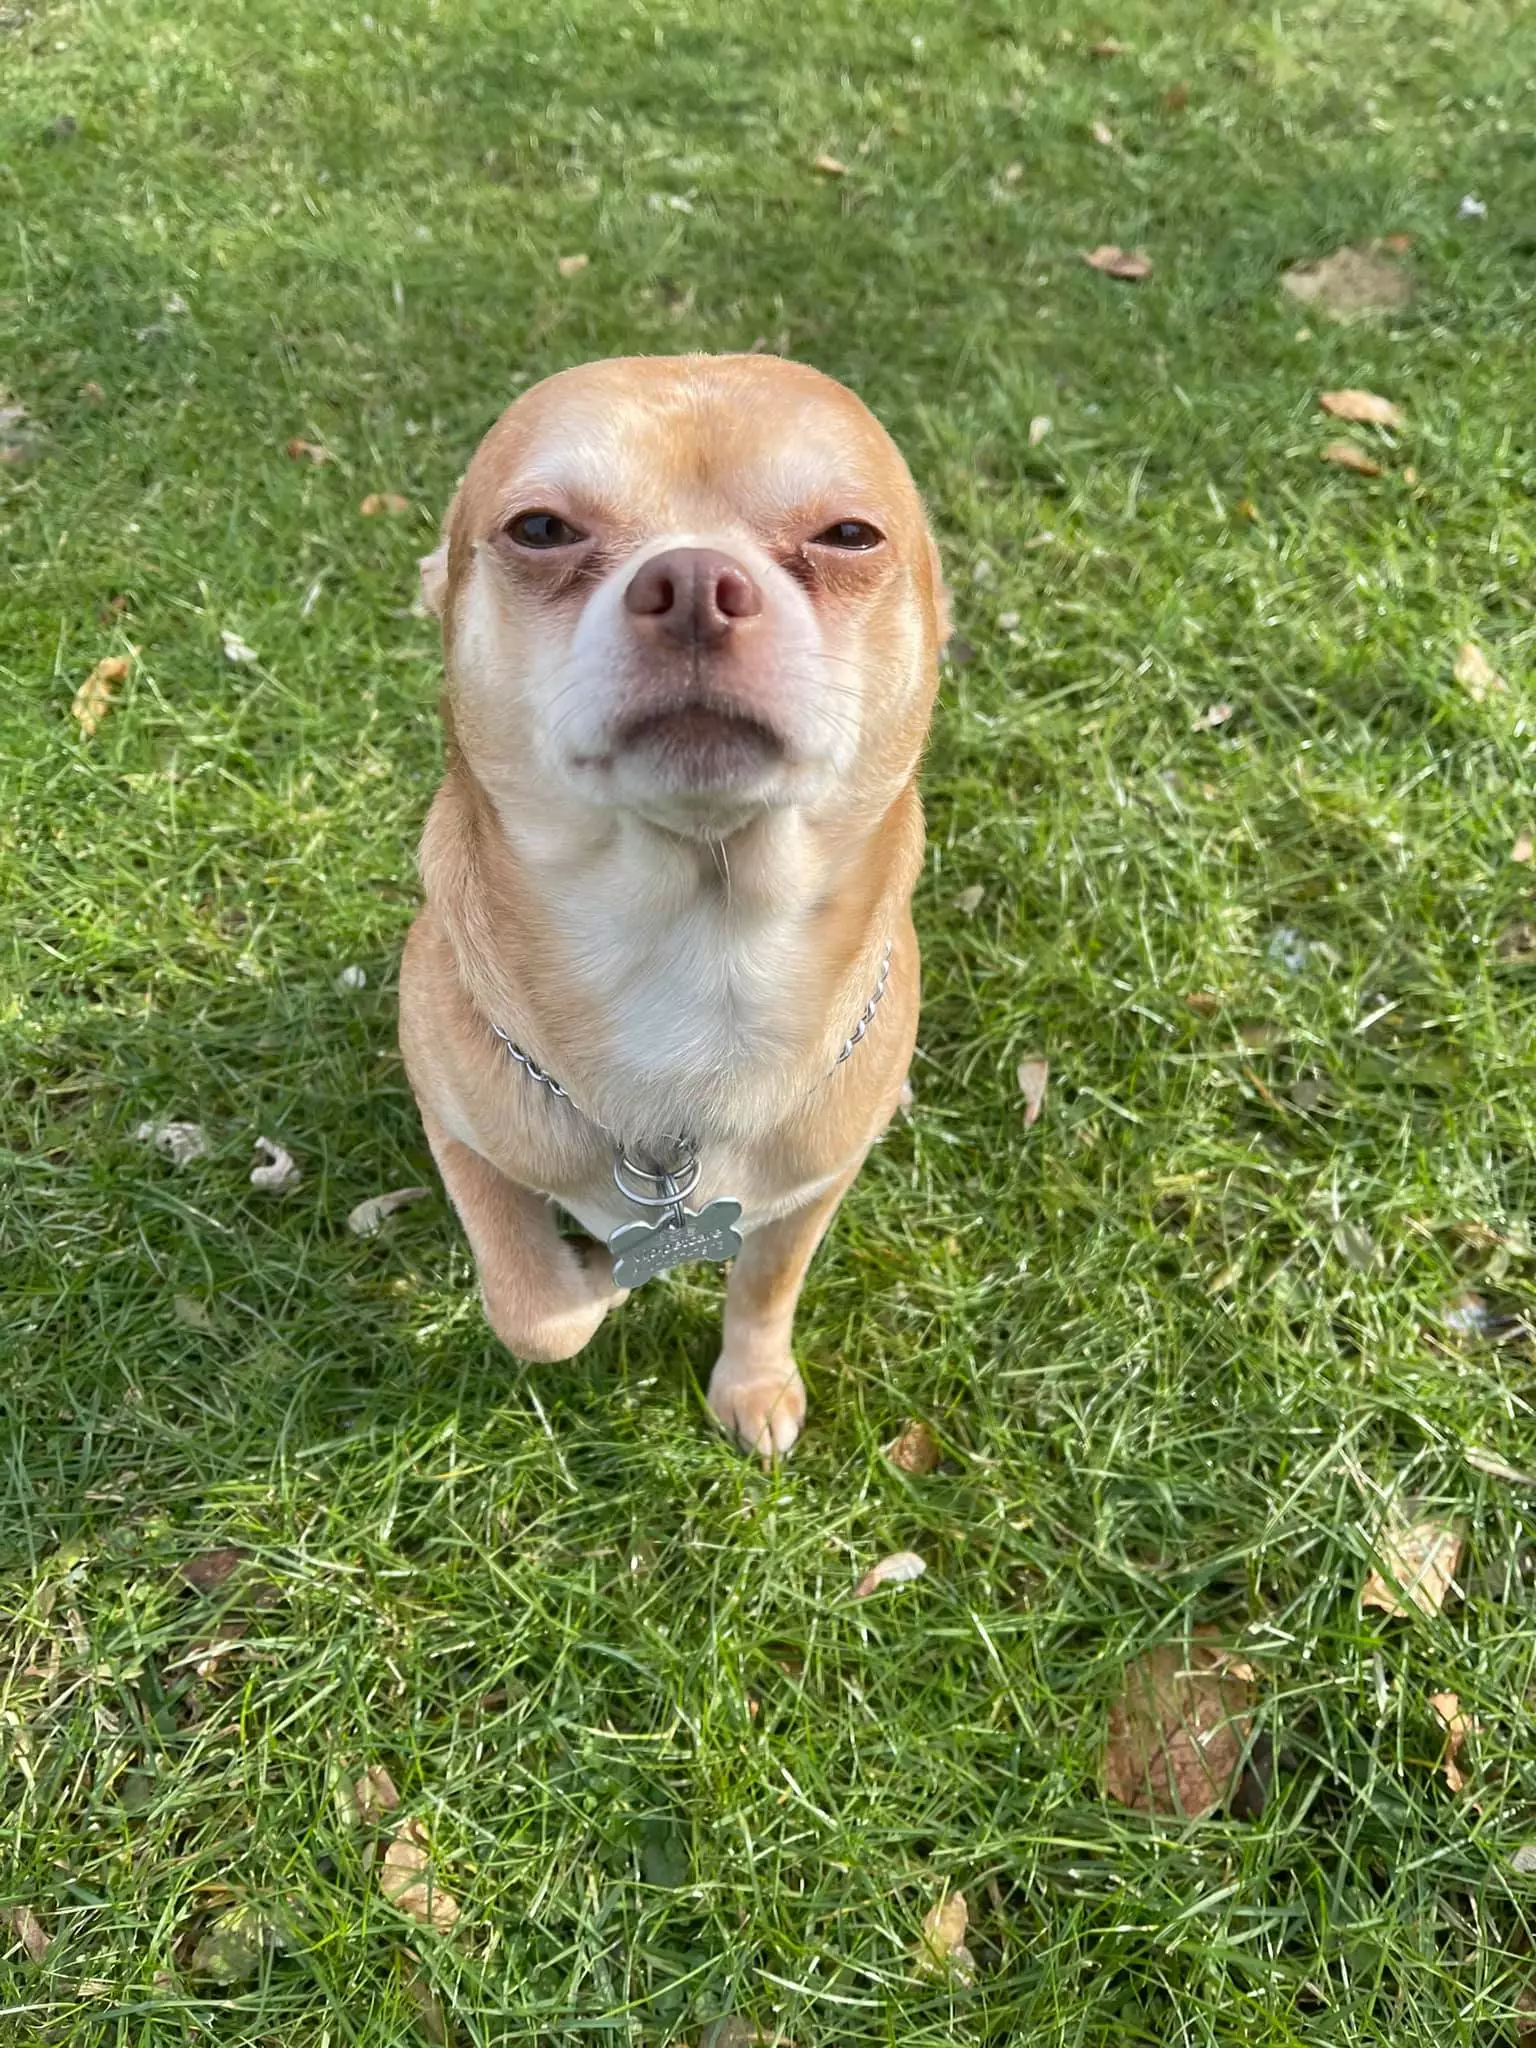 Prancer the chihuahua has gone viral on Facebook